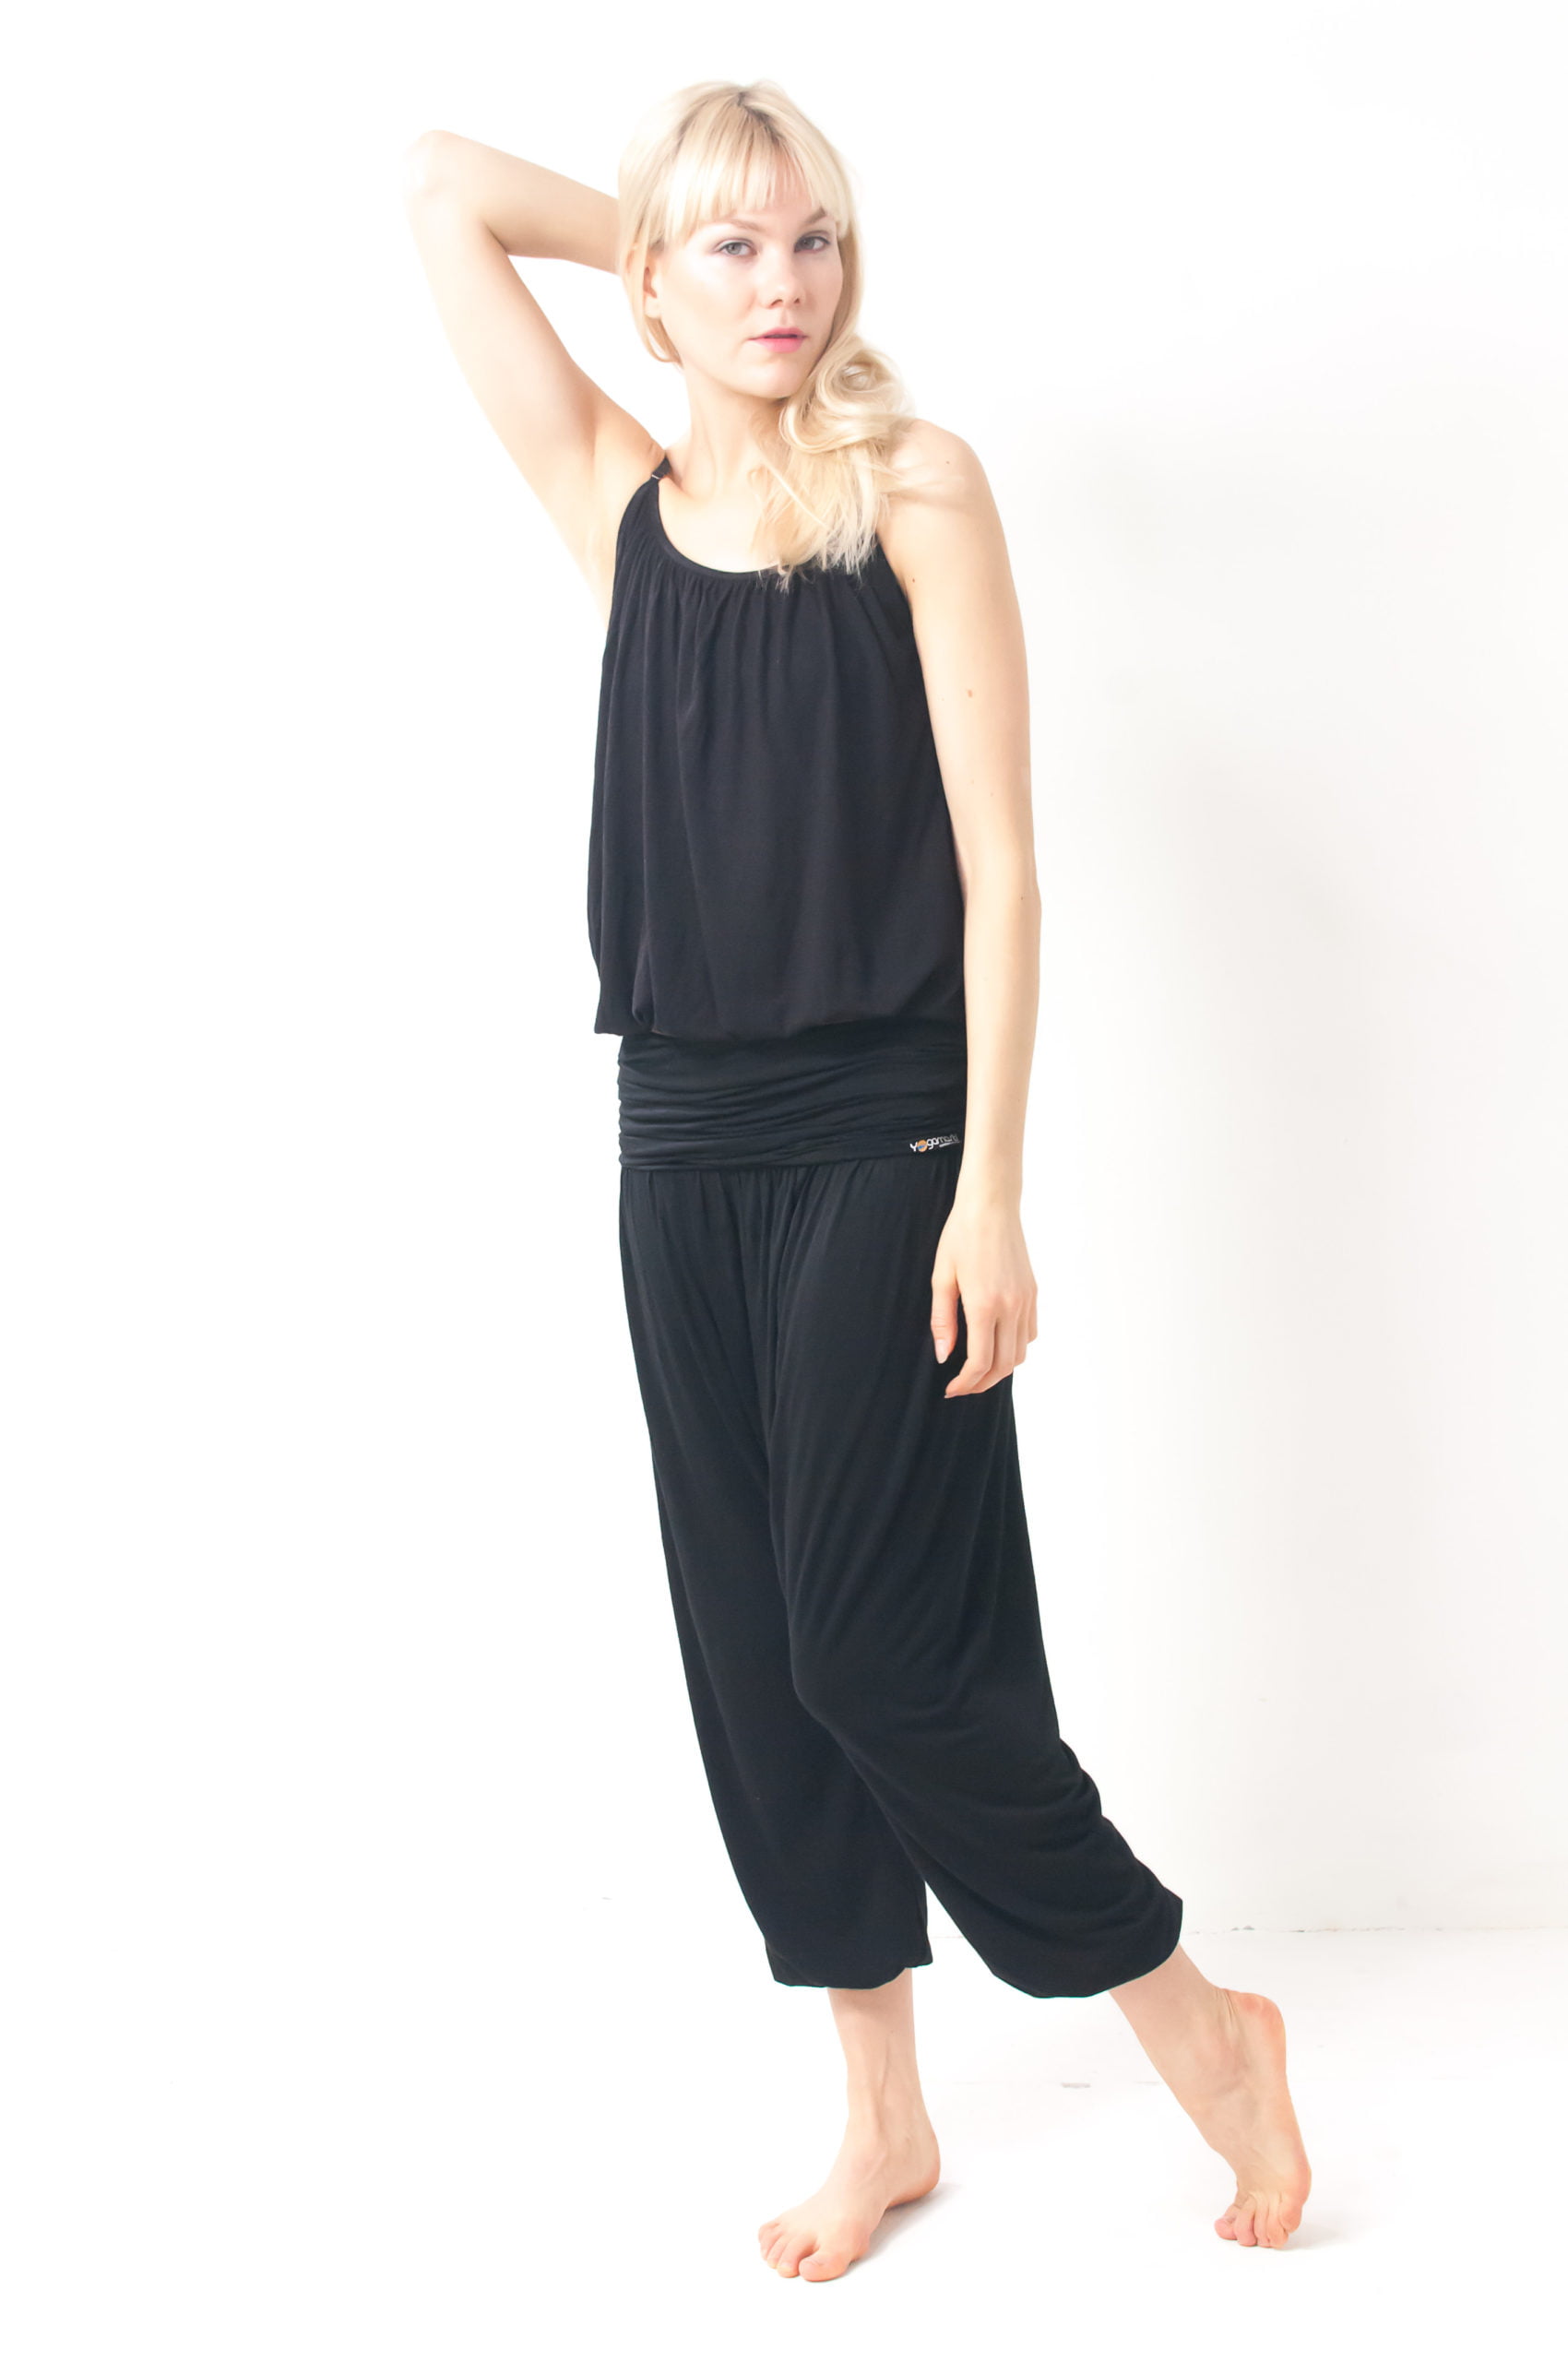 a model wearing black harem yoga pants and a loose black sleeveless top by yogamasti. she is in a relaxed pose with an arm behind her head